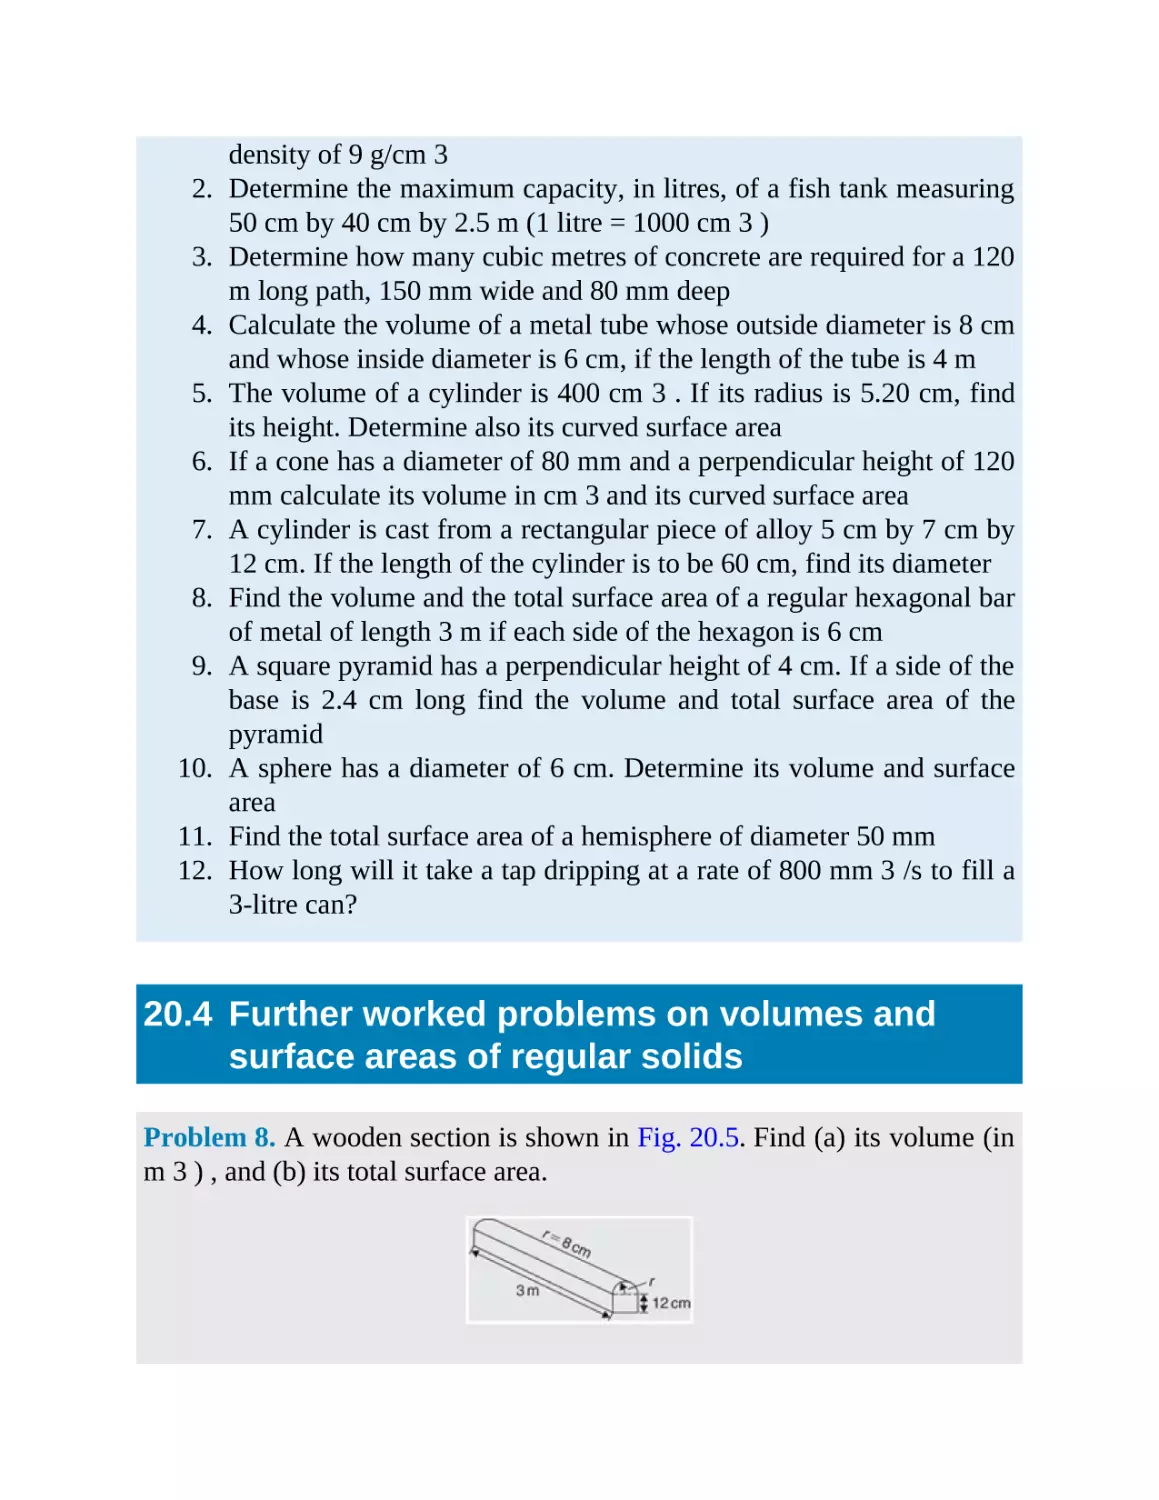 20.4 Further worked problems on volumes and surface areas of regular solids